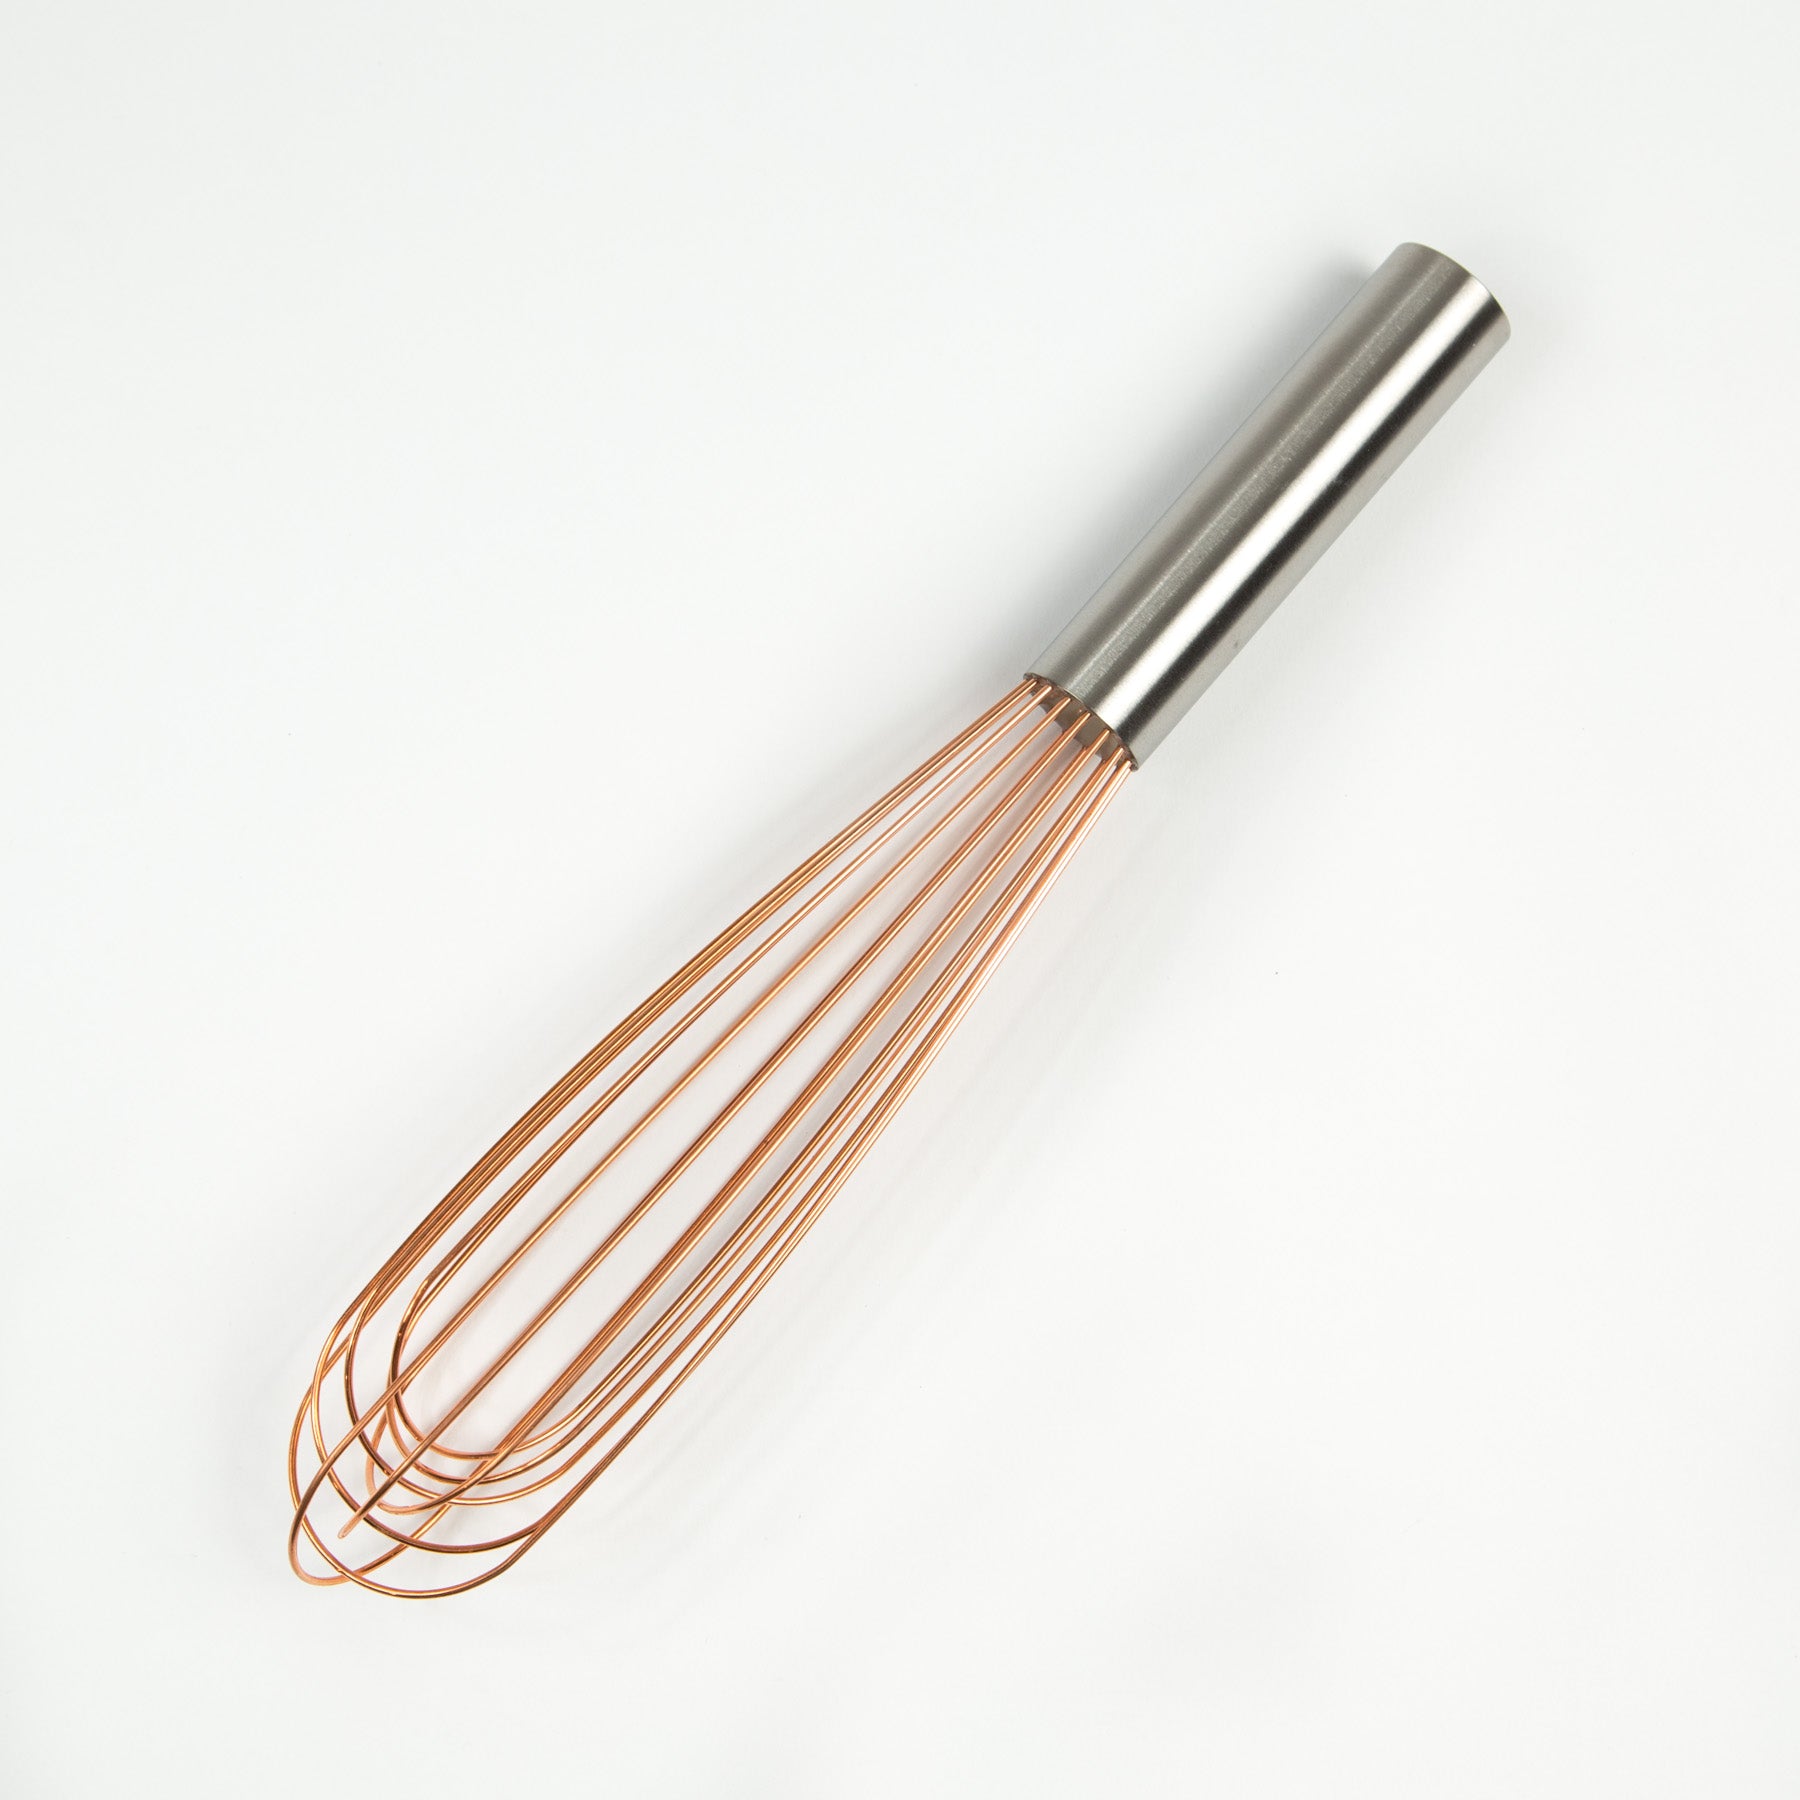 Handcrafted Pure Copper Flat Roux Whisk